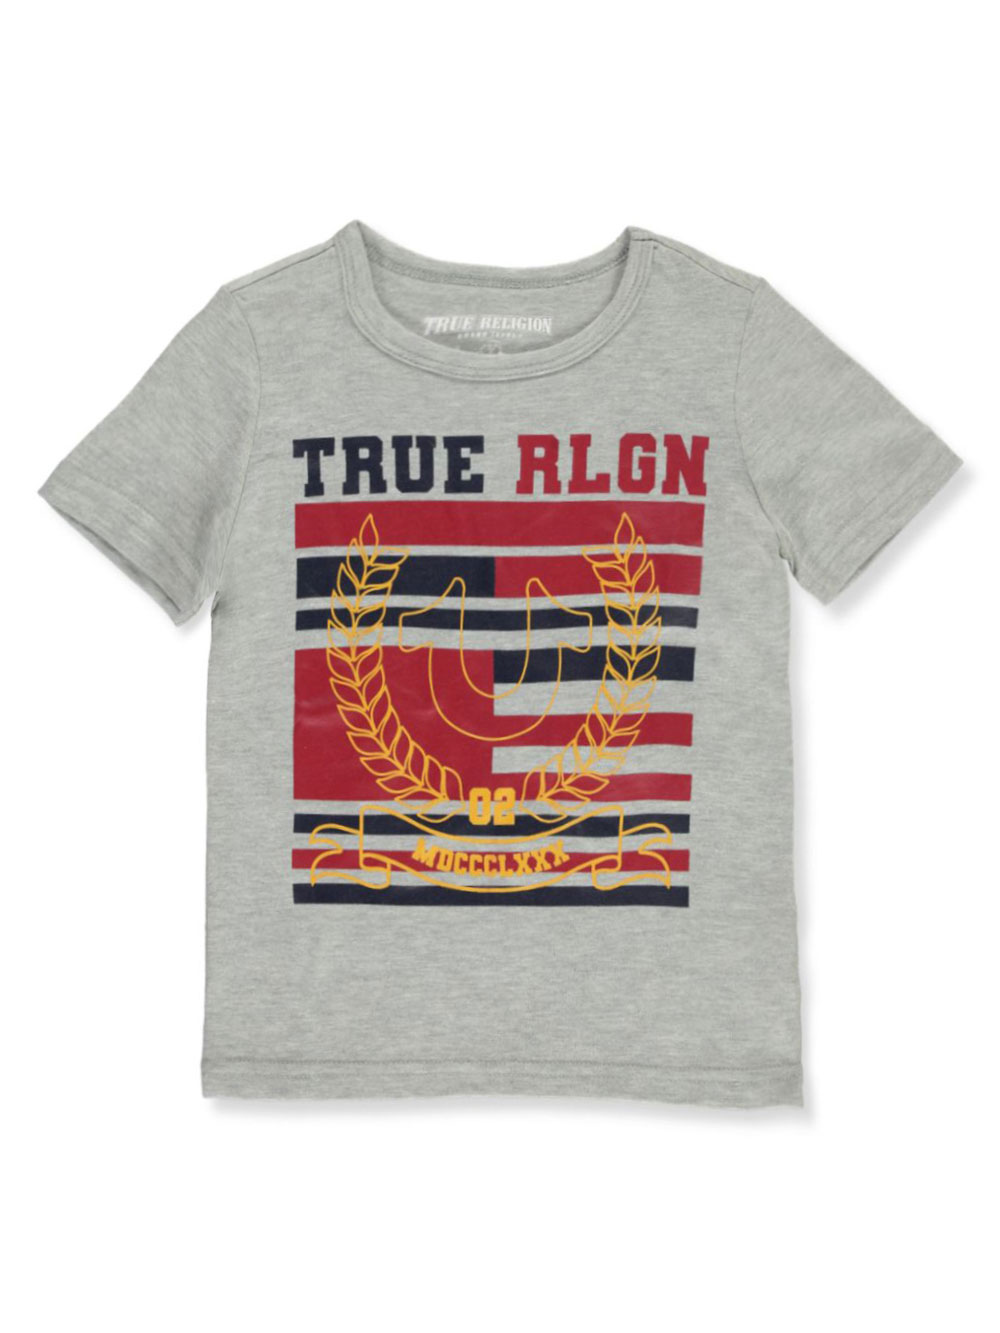 red and white true religion shirt